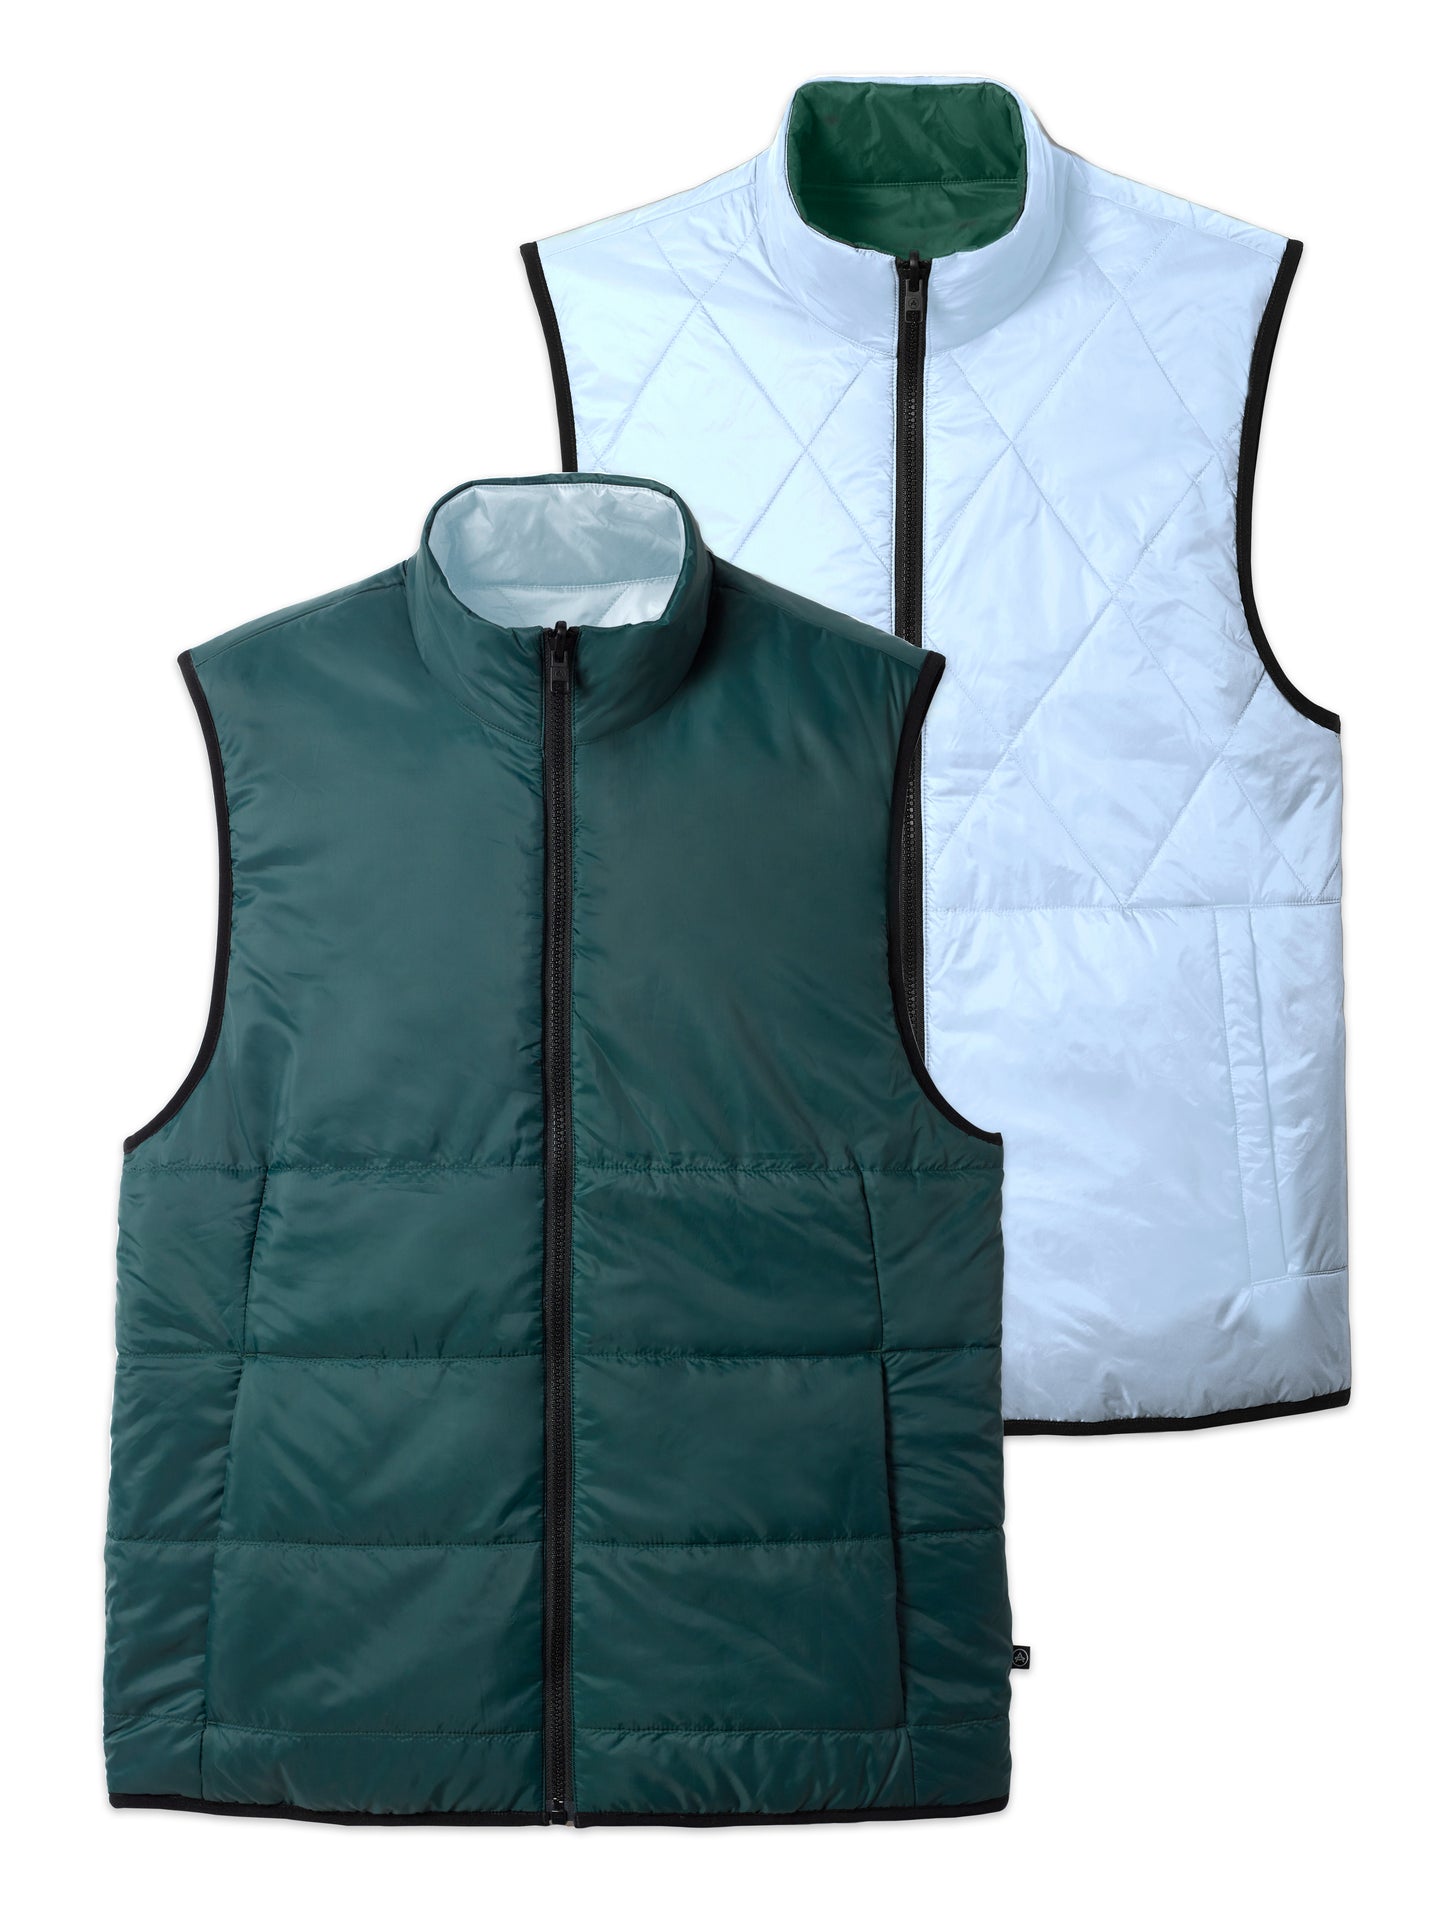 reversible insulated vest with green and blue side